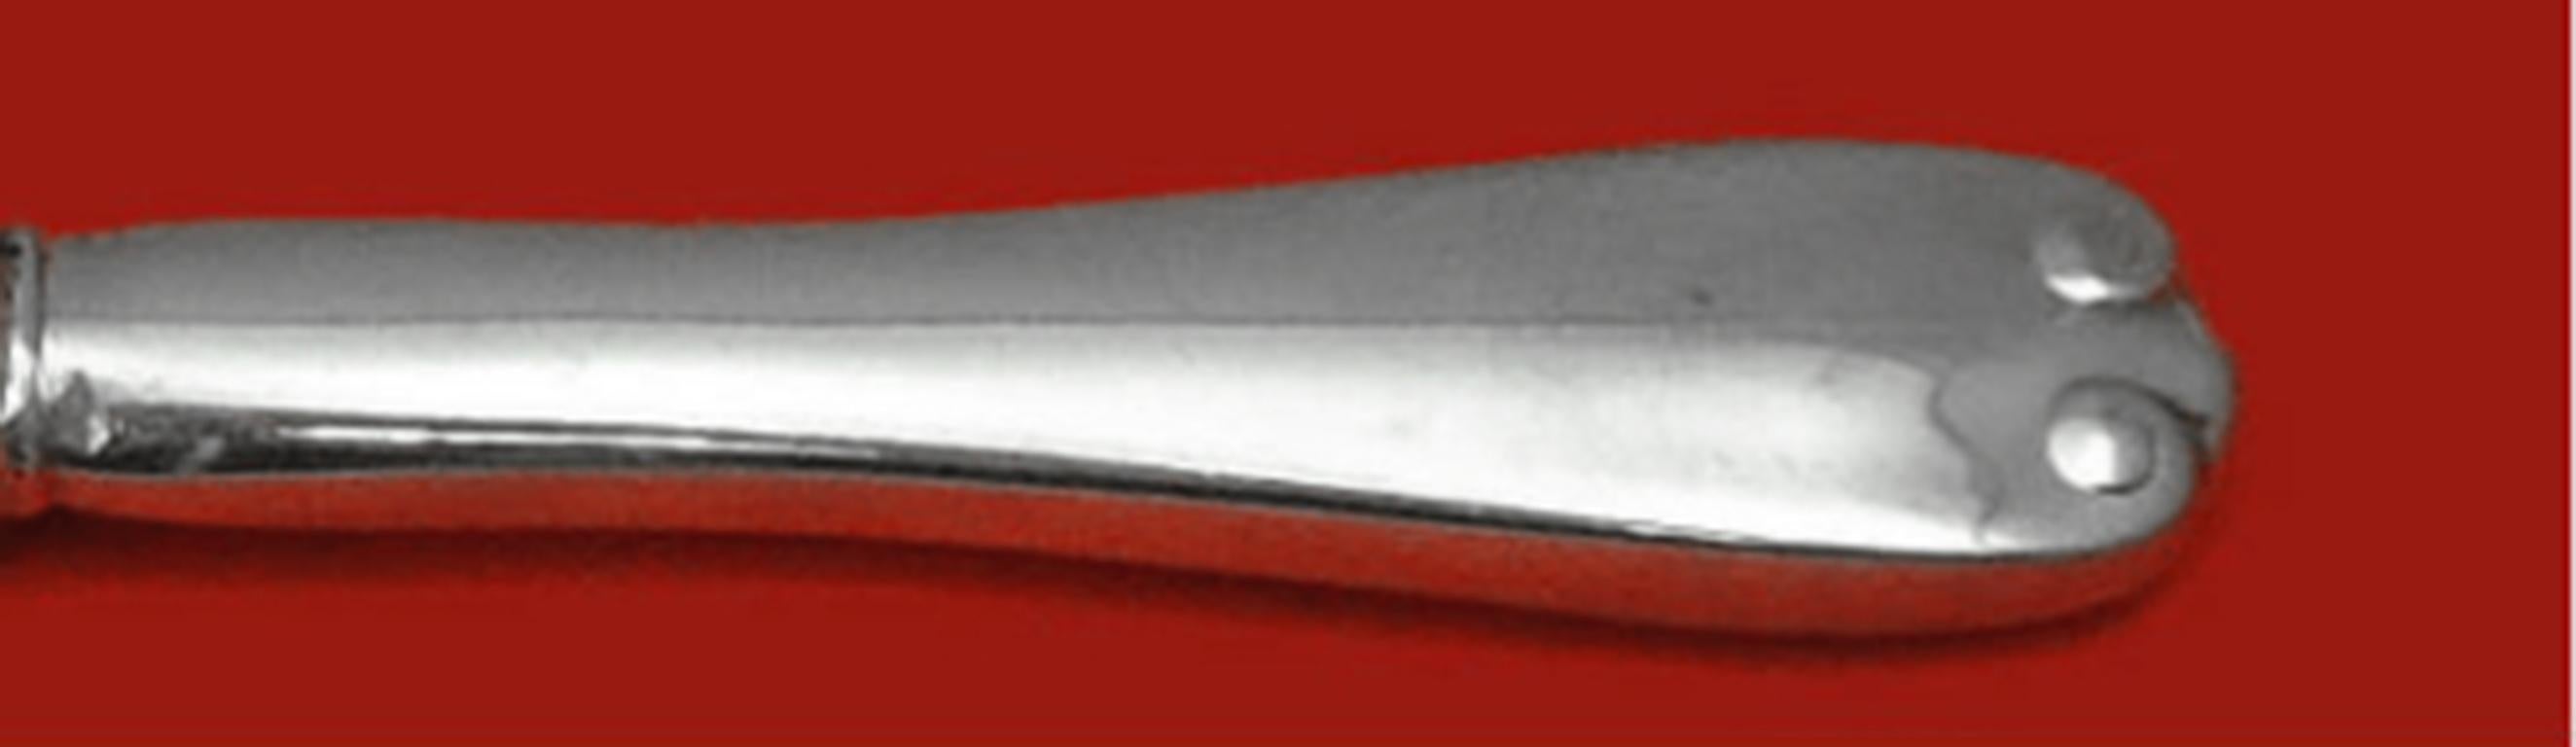 Sterling silver hollow handle with stainless blade regular knife, French 9 1/4